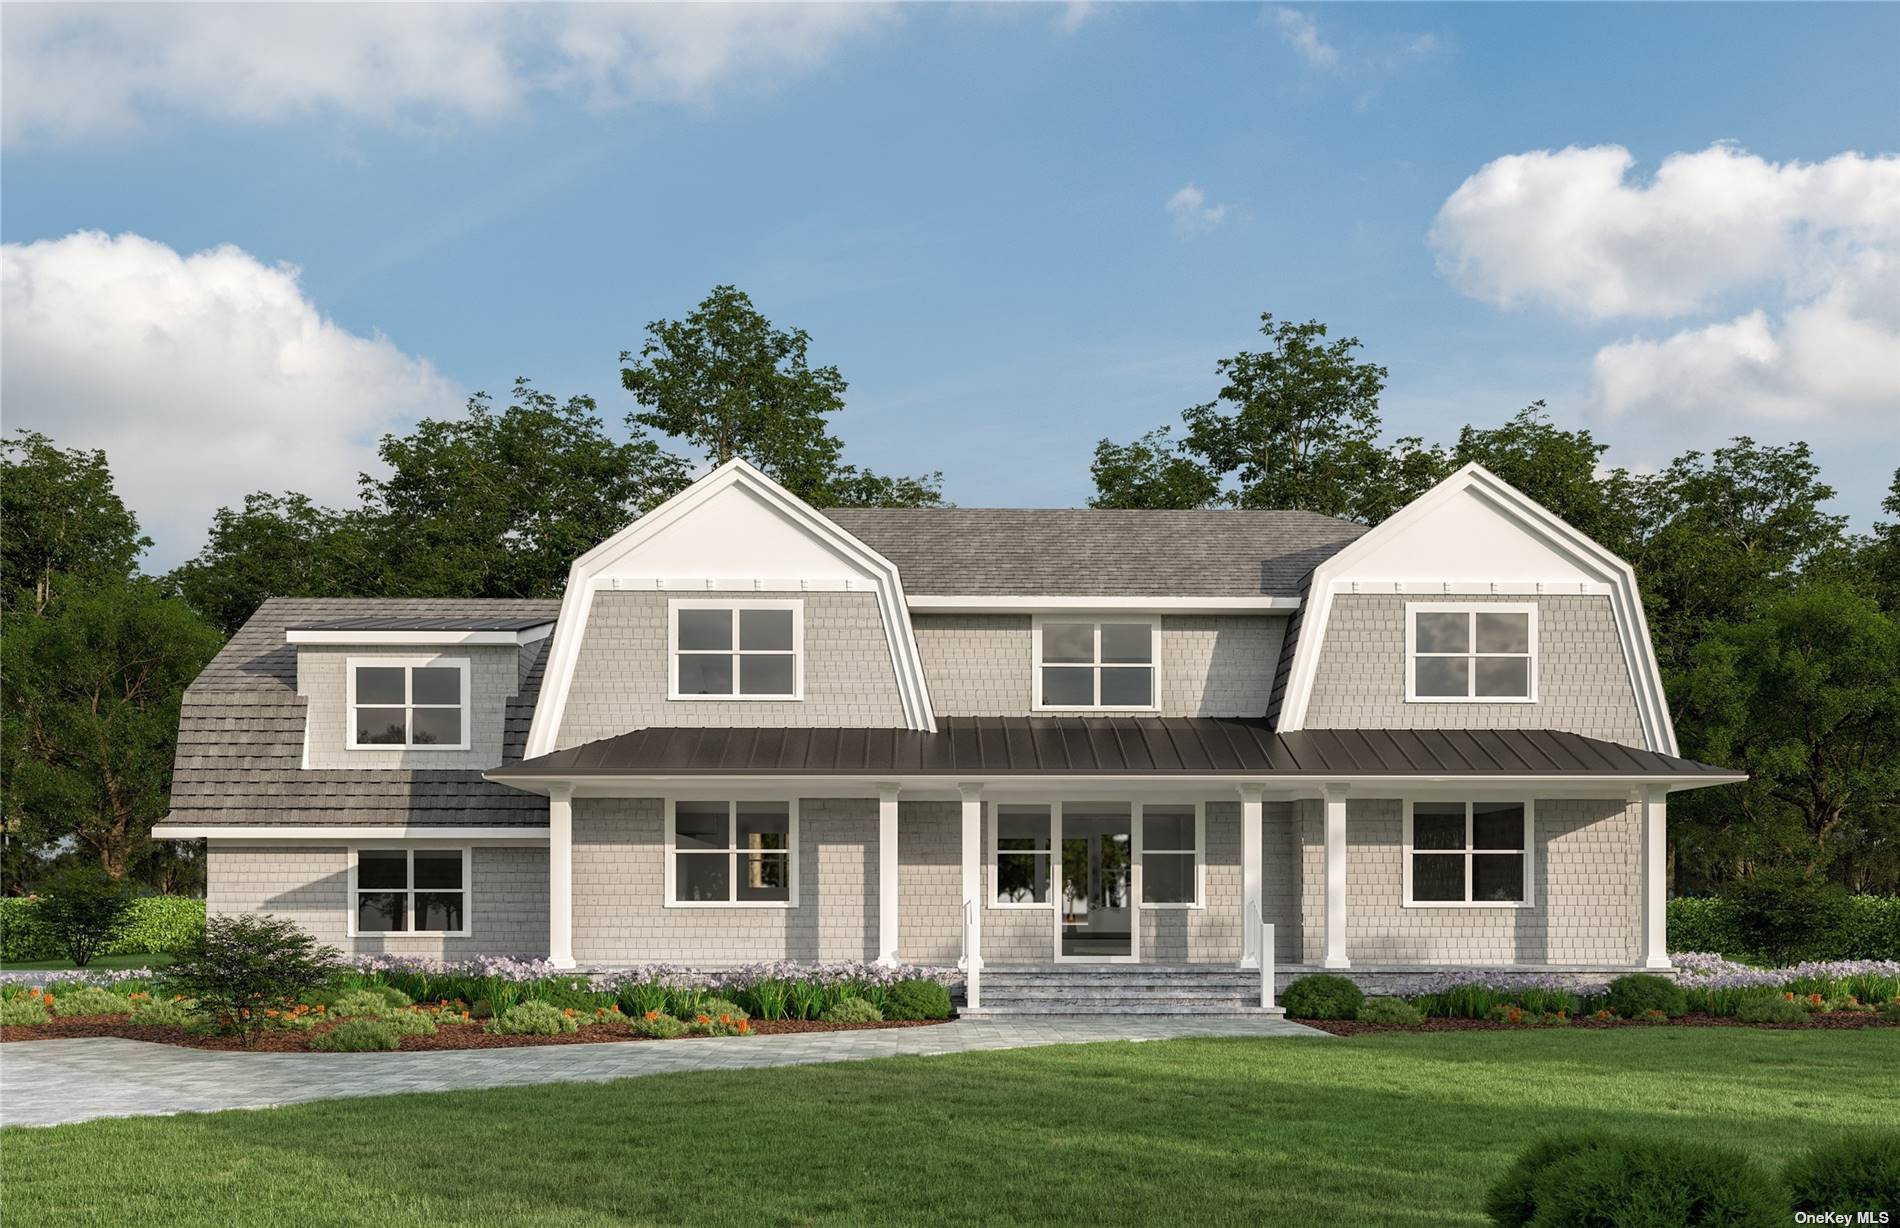 This brand new luxury development offers 3 distinctly unique home styles over 9 spacious lots.